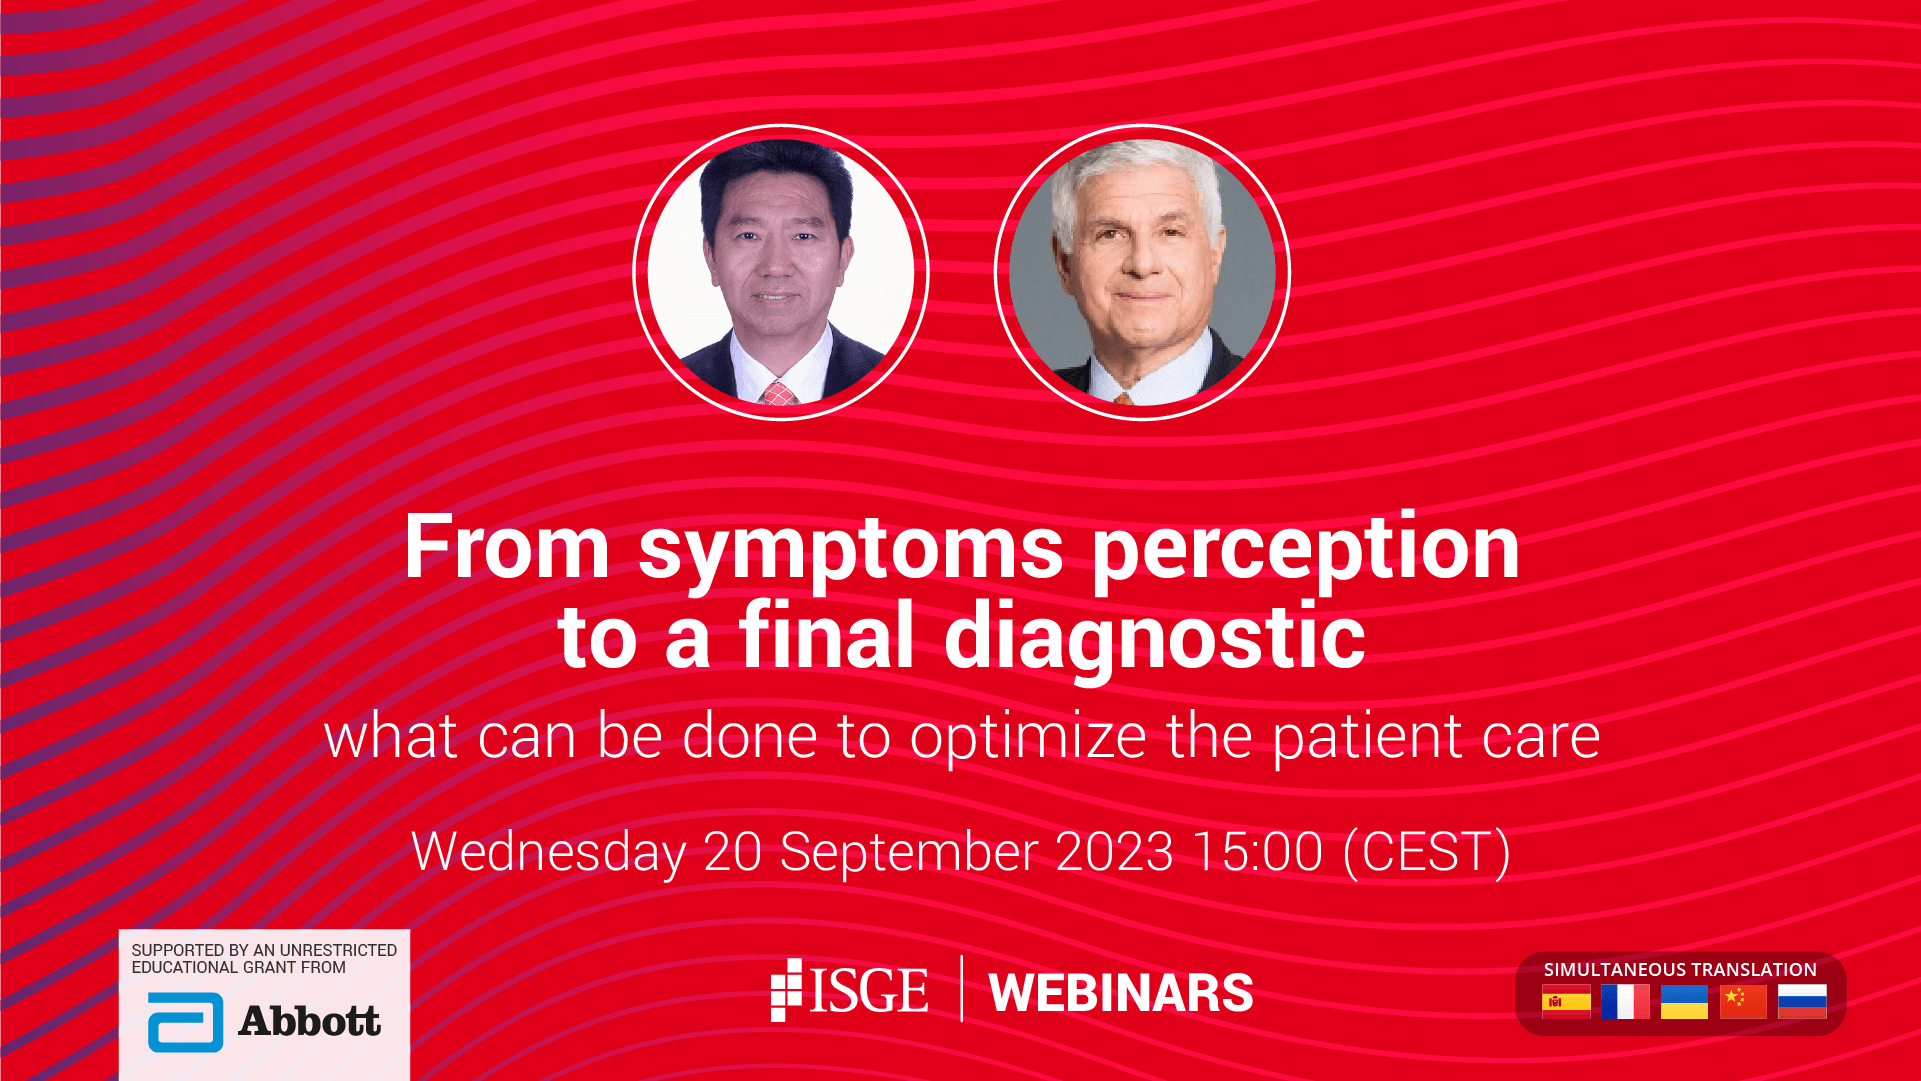 From symptoms perception to a final diagnostic – what can be done to optimize the patient care